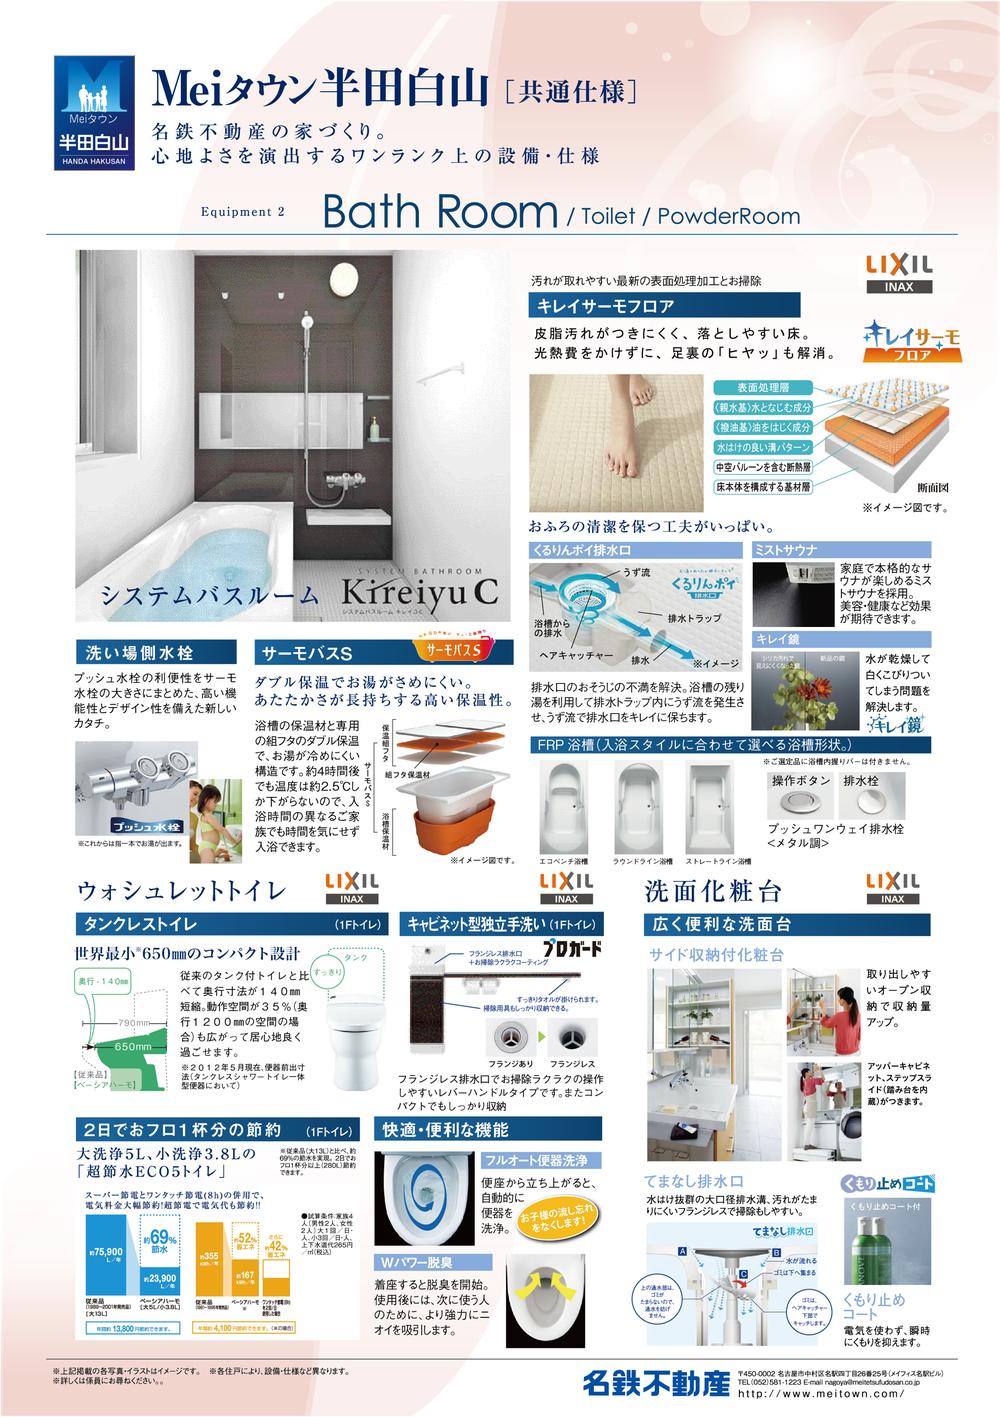 Same specifications photo (bathroom). Common Specifications: adopted hot water is less likely to cool down "Samobasu S" or your simple "Kururin poi drainage ditch" of cleaning, such as multi-functional Rikushiru manufactured by the "Kireiyu C". 